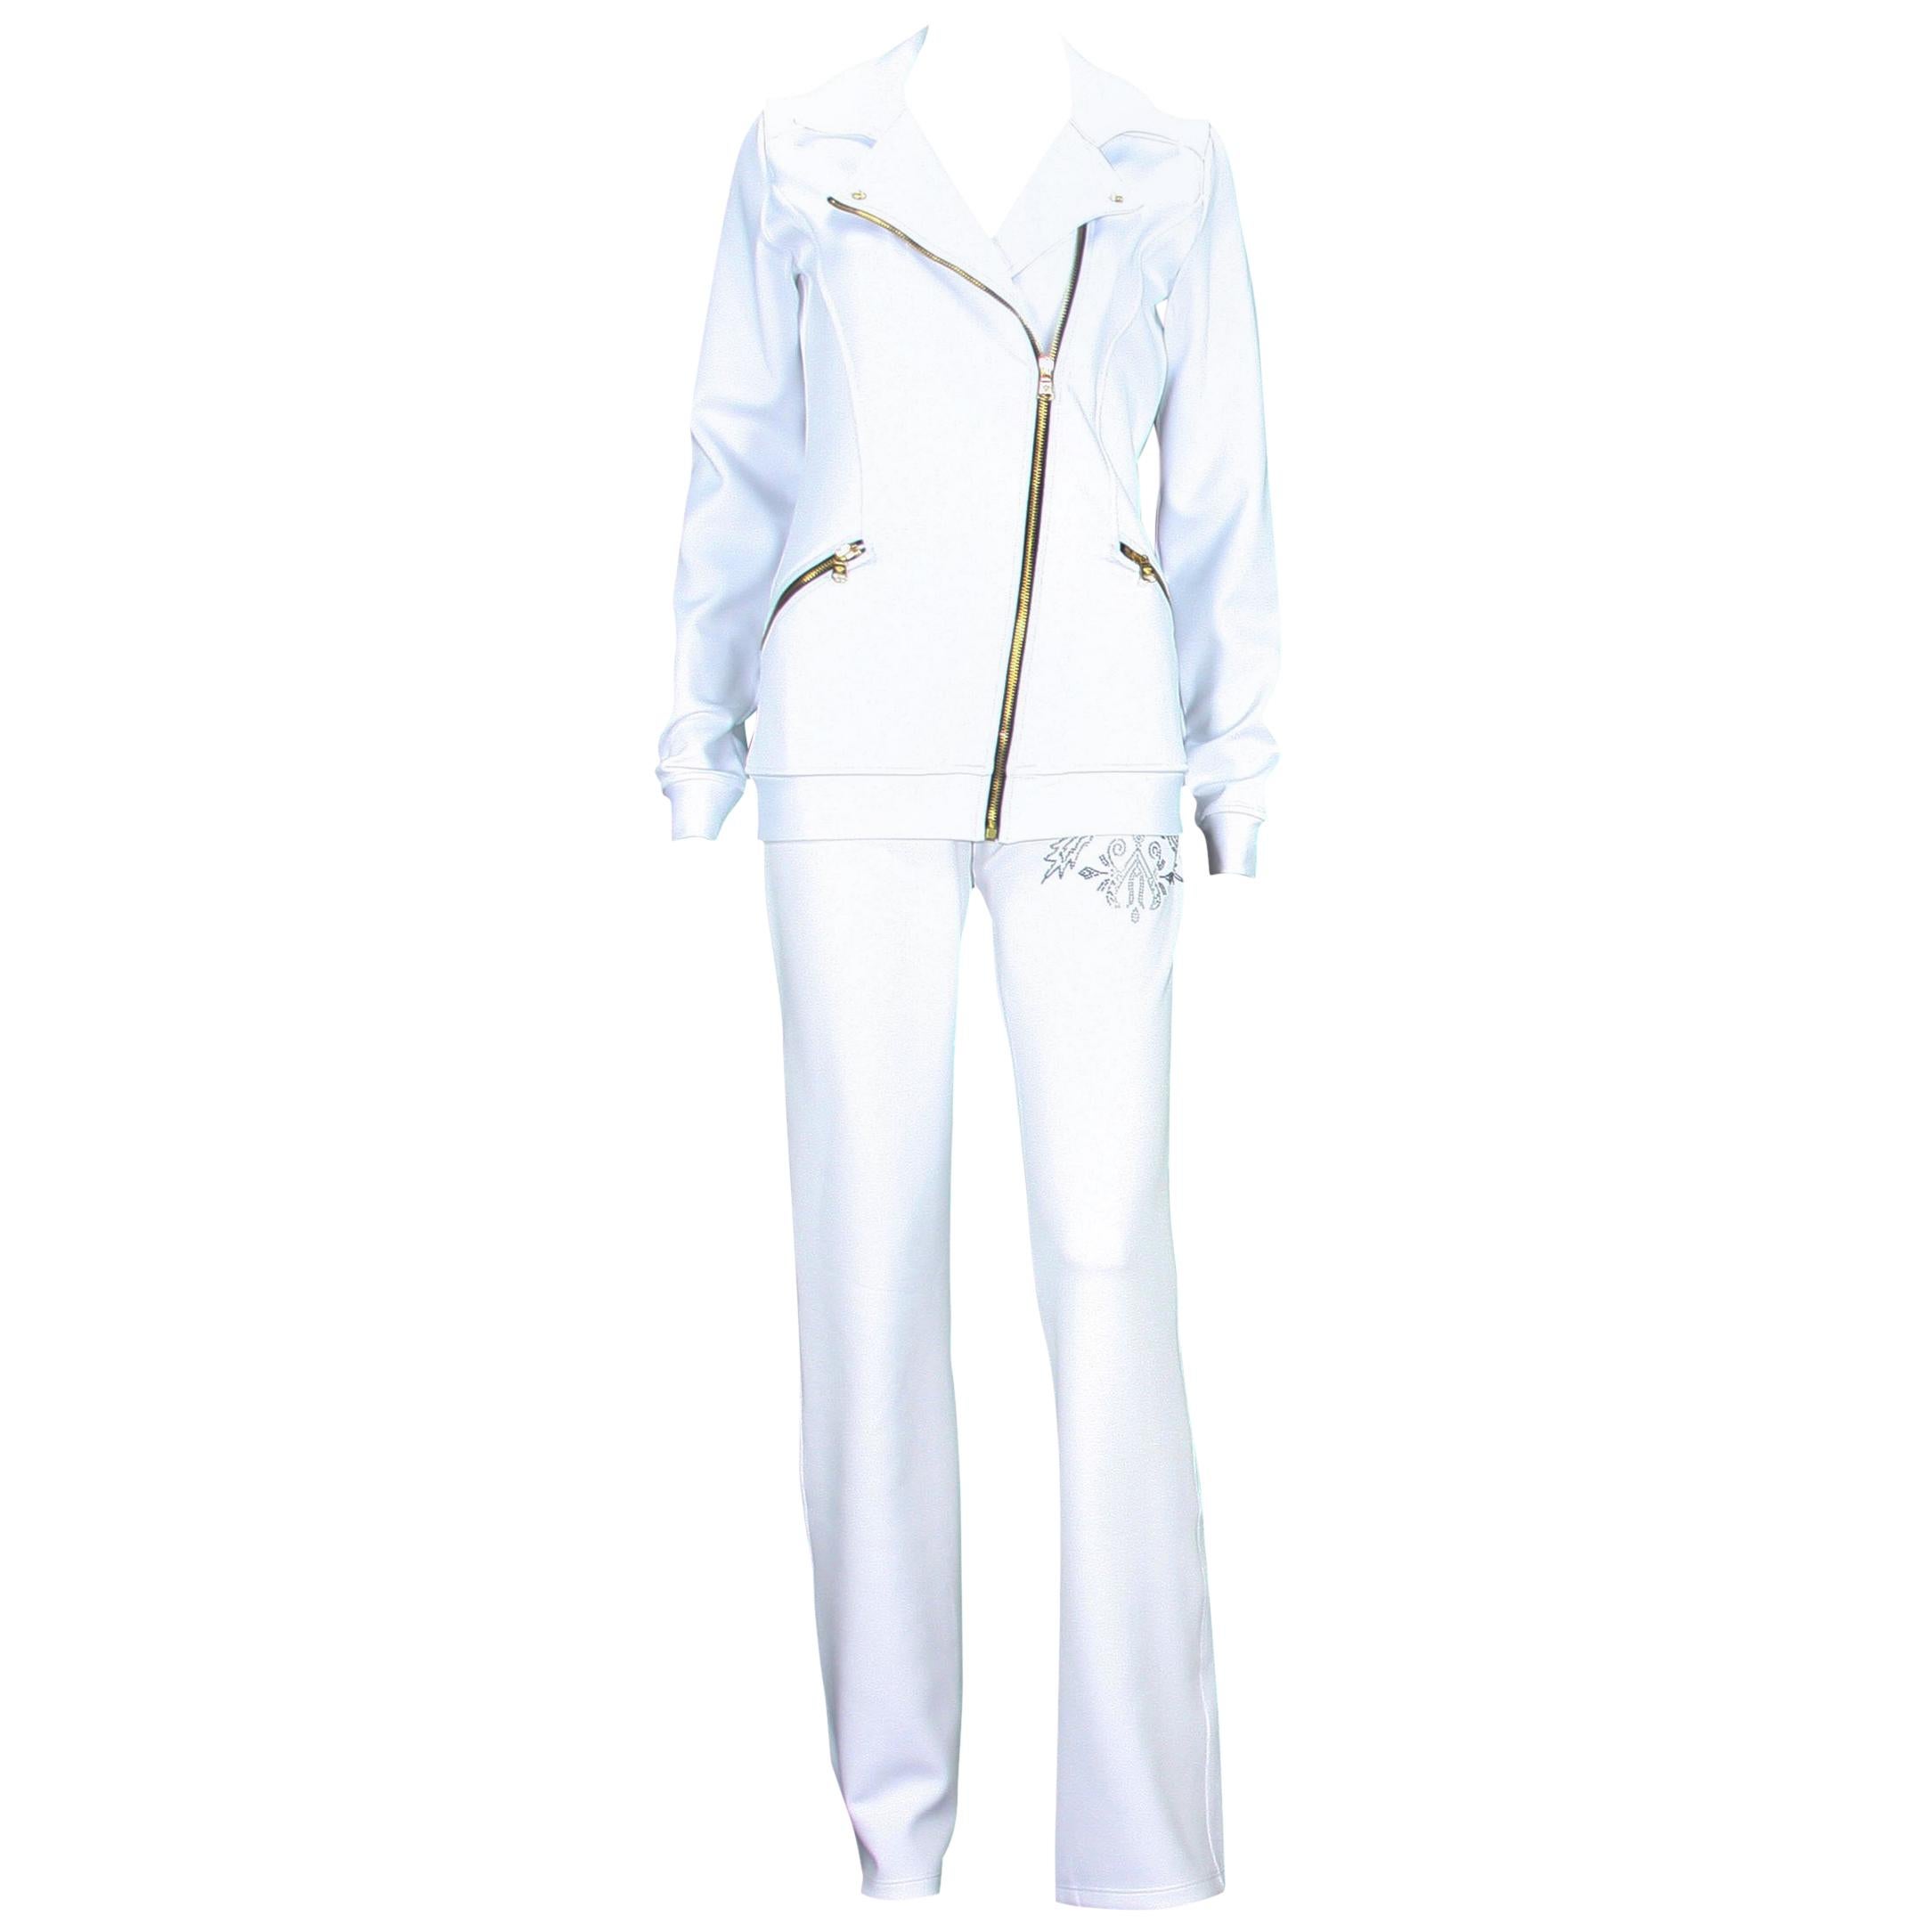 New Versace Women's White Gym Pant Suit with Crystal Embellishment  US 6 and 8